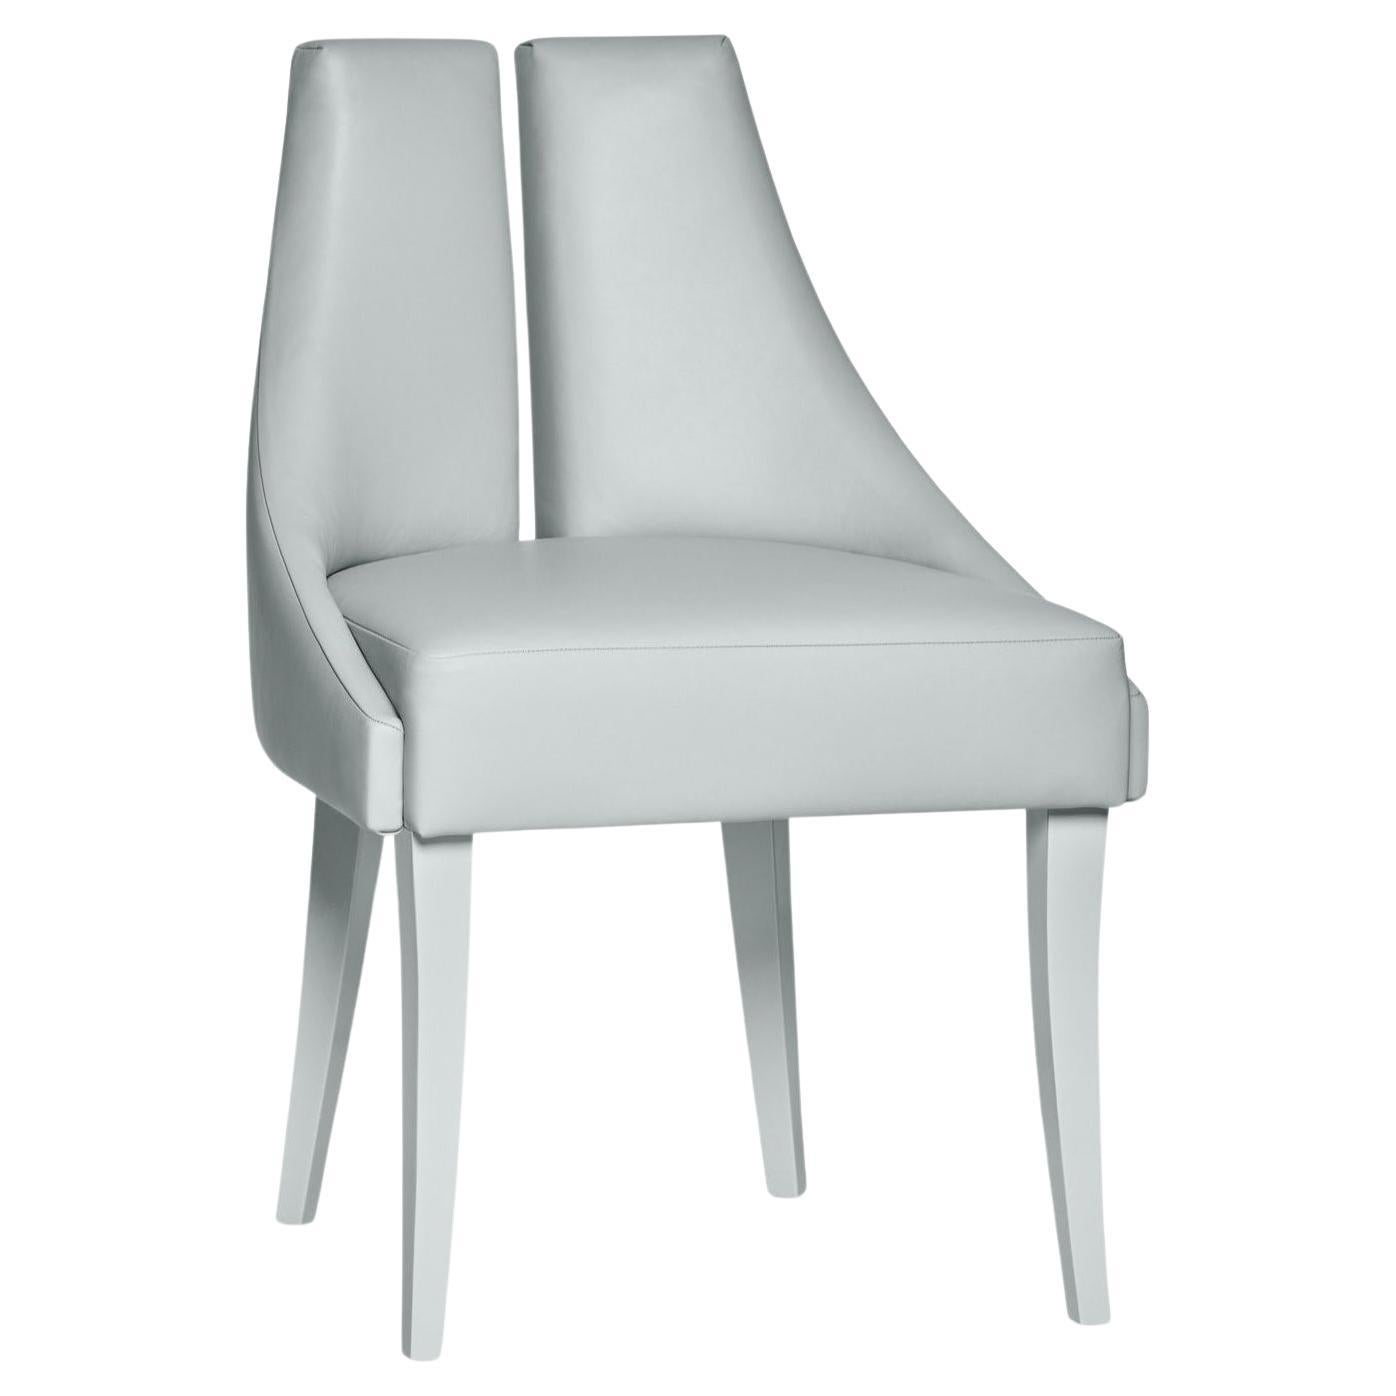 Contemporary Dining Chair mit Nahtdetails